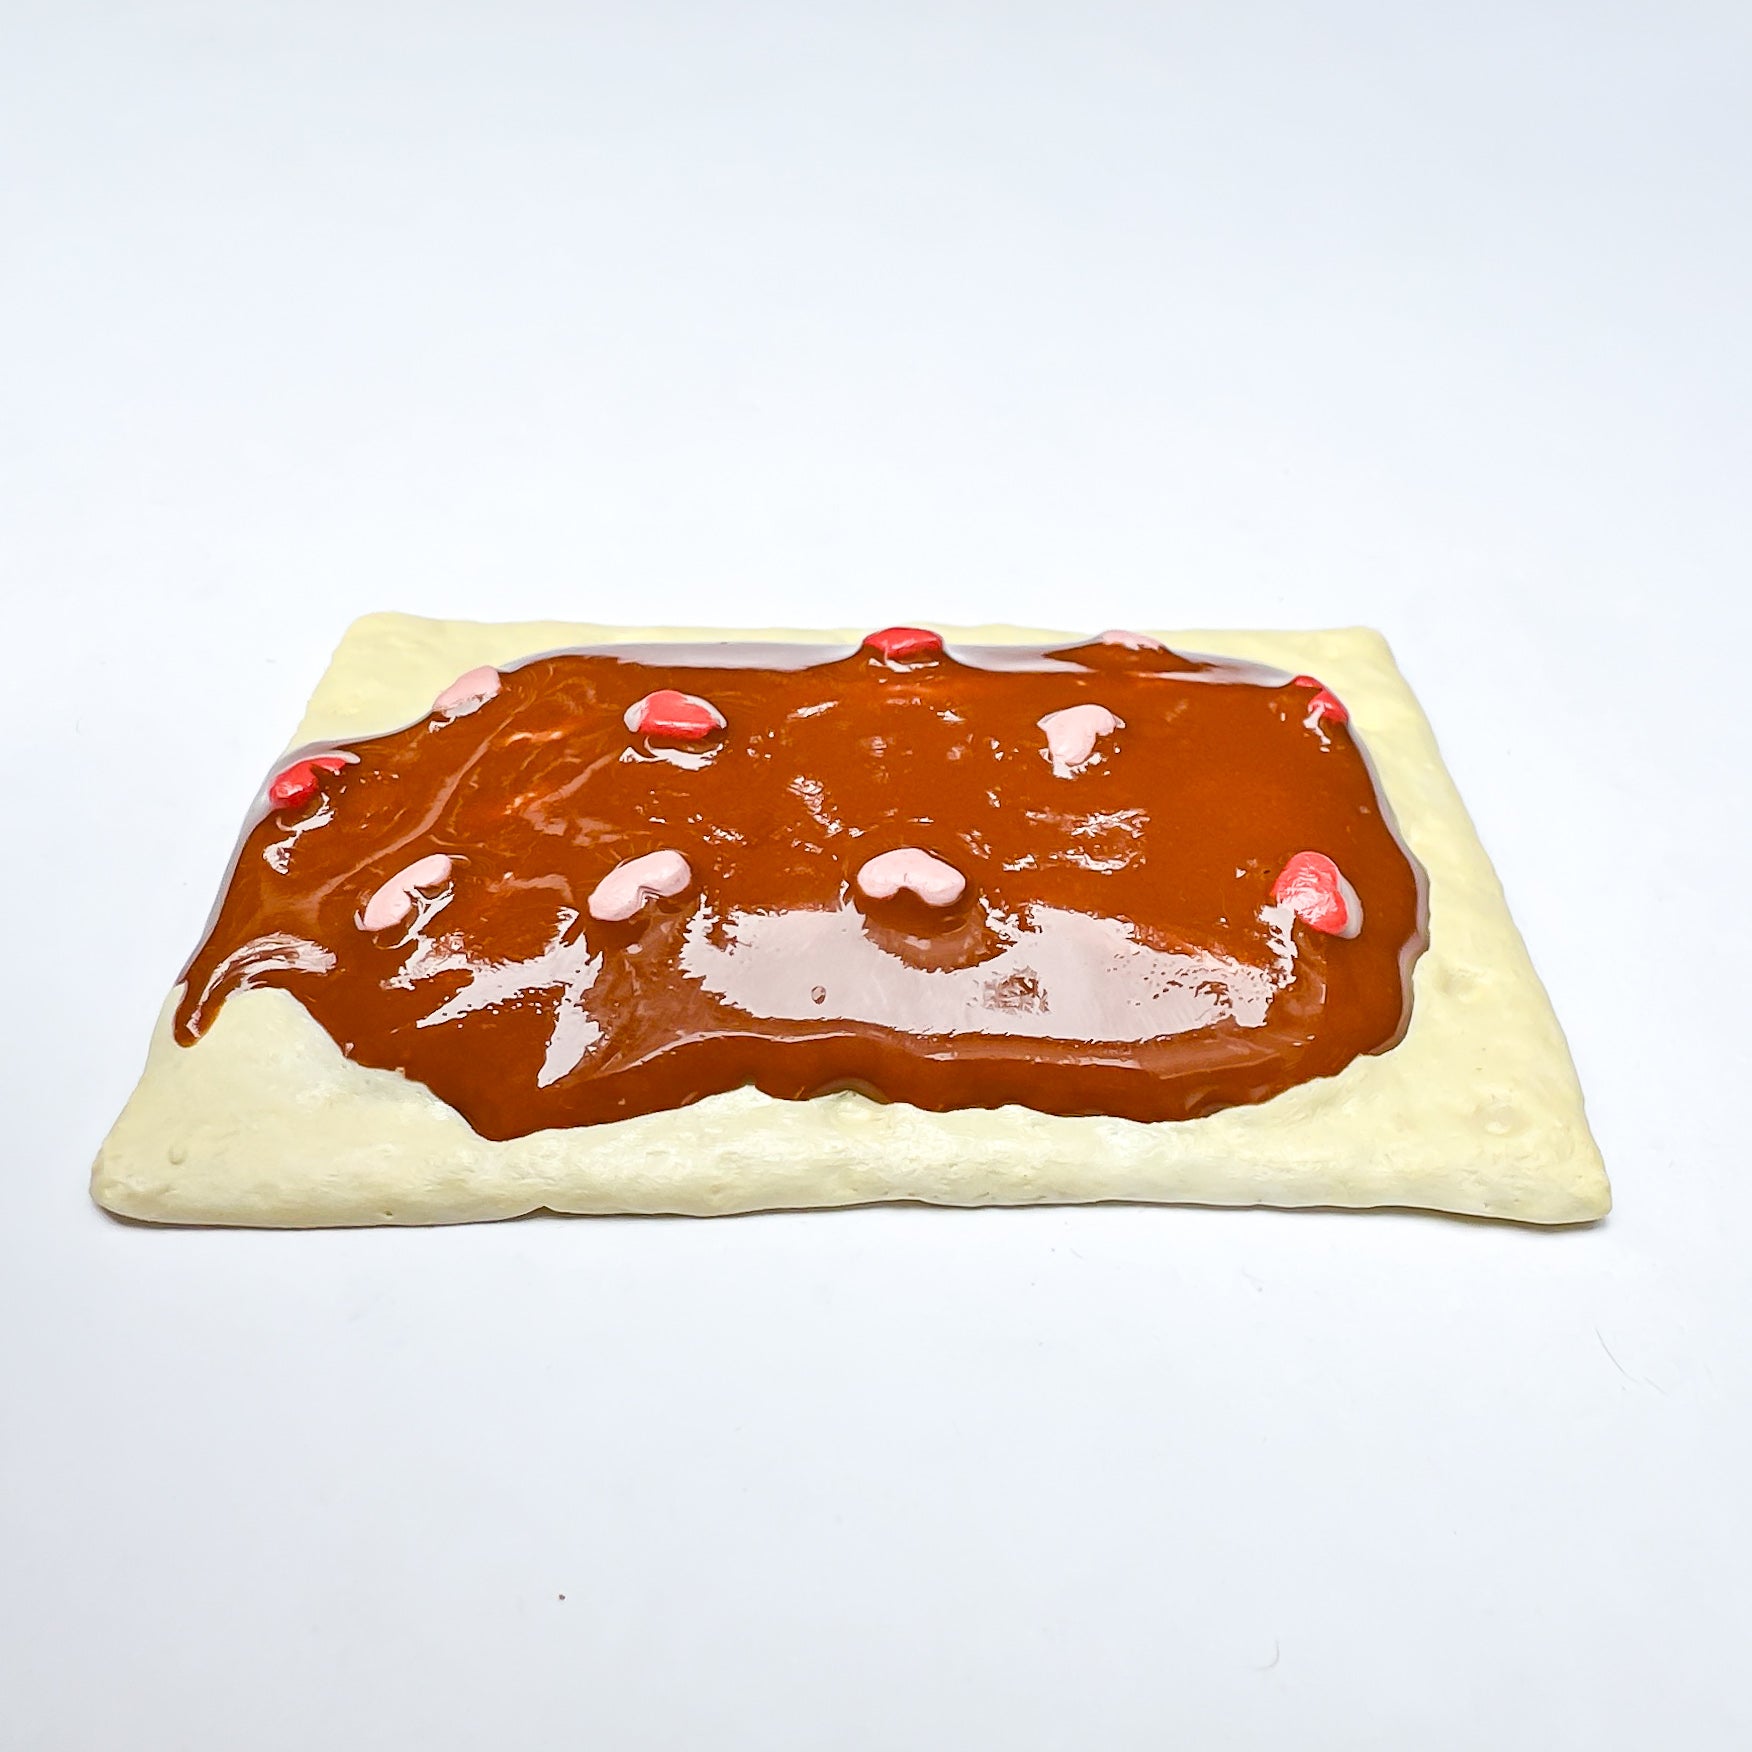 SECOND Porcelain Glossy Icing Chocolate Heart Poptart